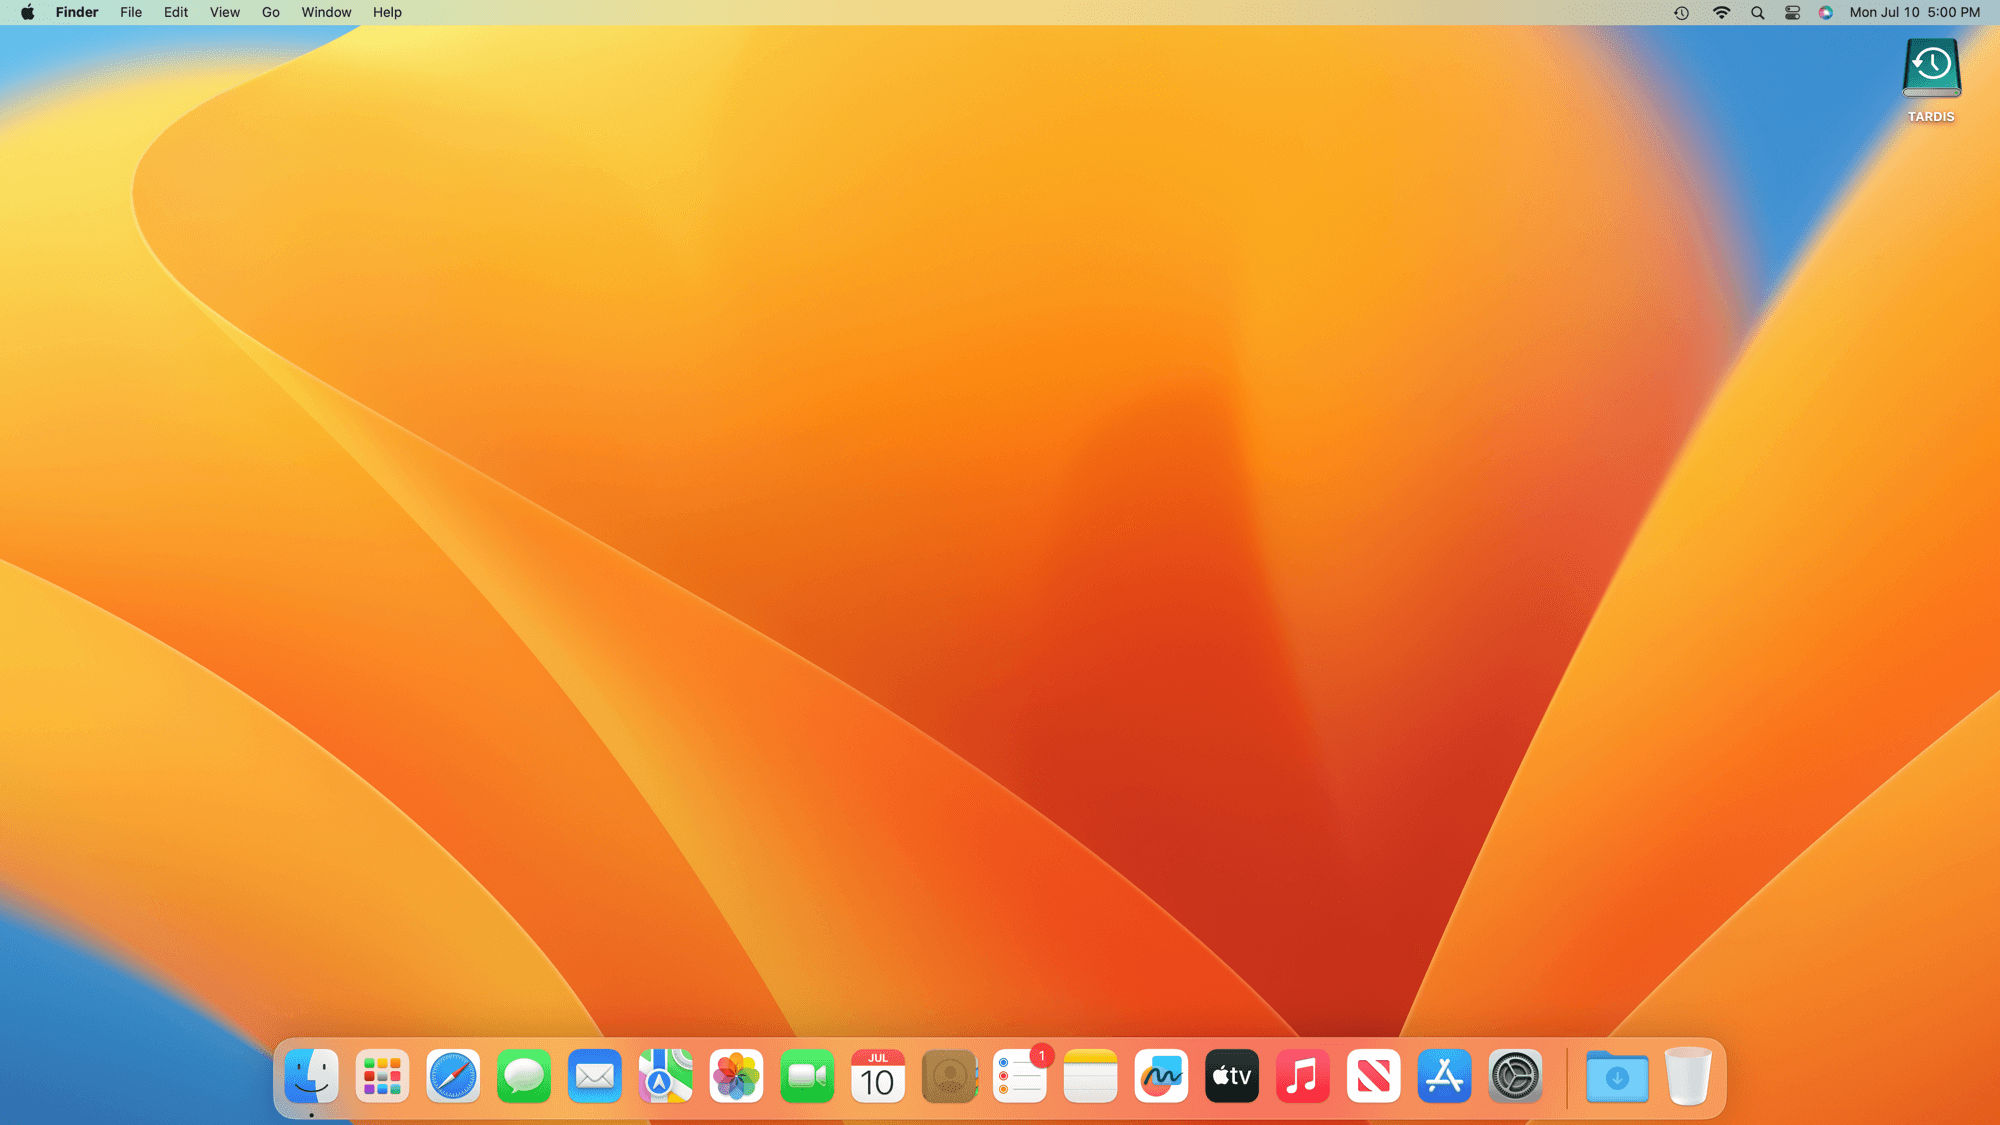 A fresh, default macOS Ventura desktop with a Time Machine drive named “TARDIS” in the corner.